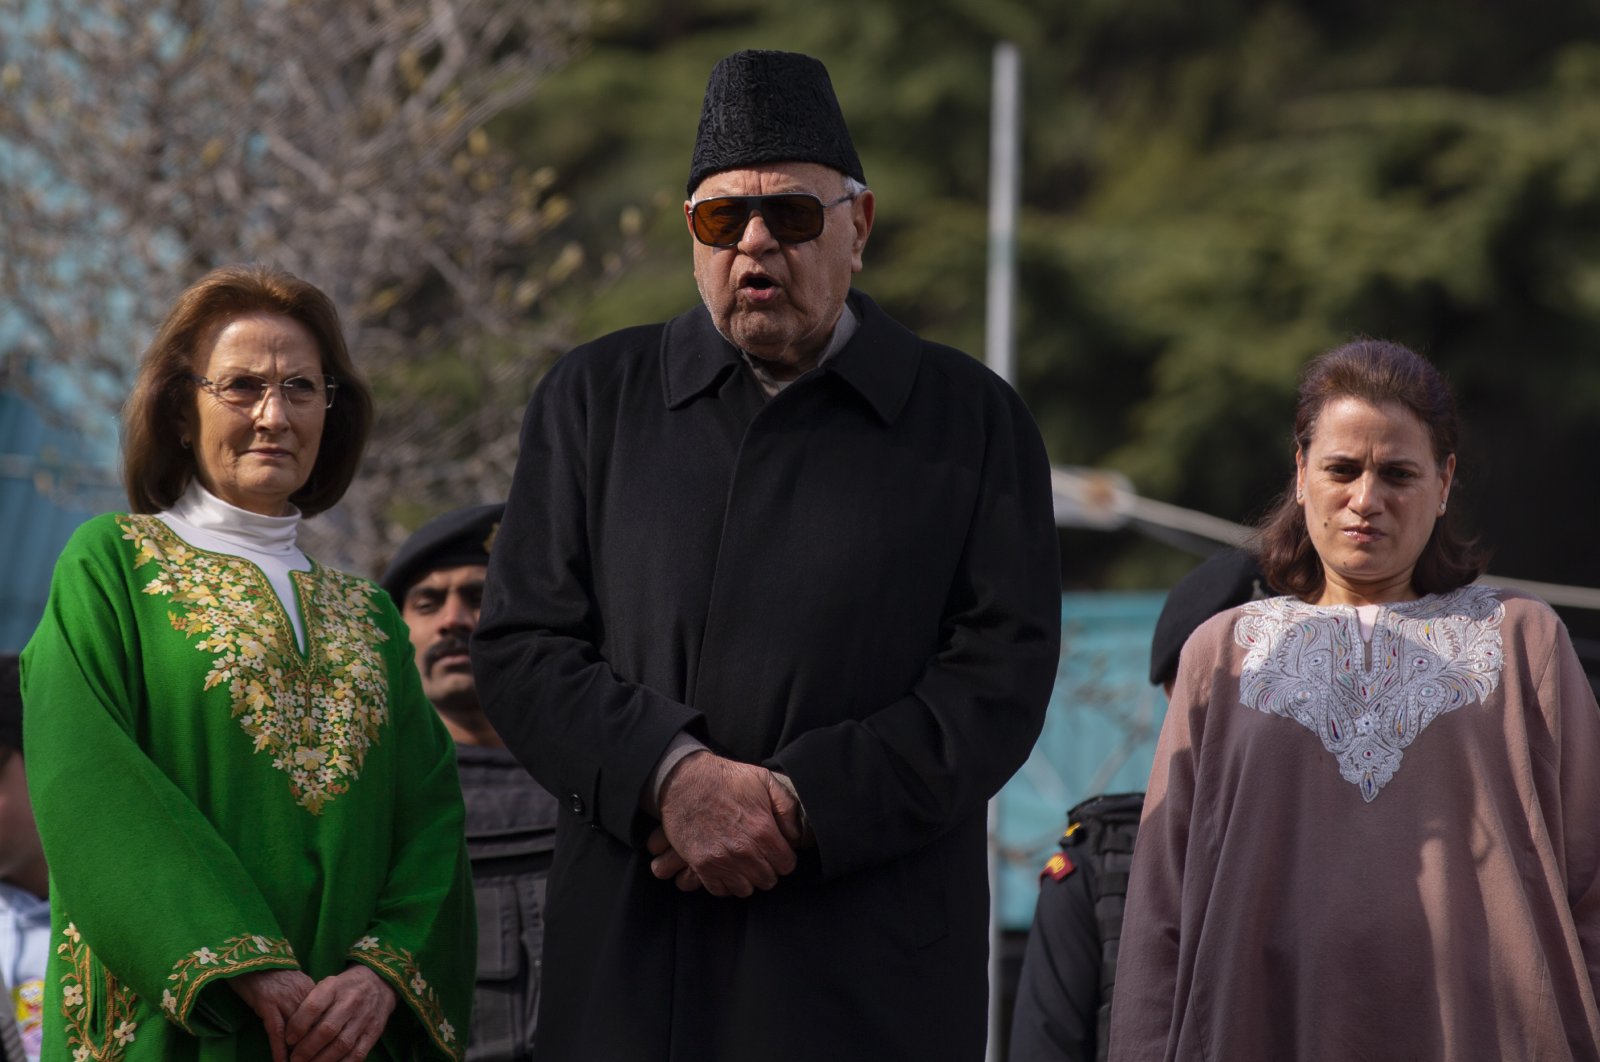 Former Chief Minister of Jammu and Kashmir and National Conference party president Farooq Abdullah,(C) flanked by his wife Molly Abdullah, (L) and daughter Safia Abdullah speaks to media persons at his residence, Srinagar, March 13, 2020. (AP Photo)